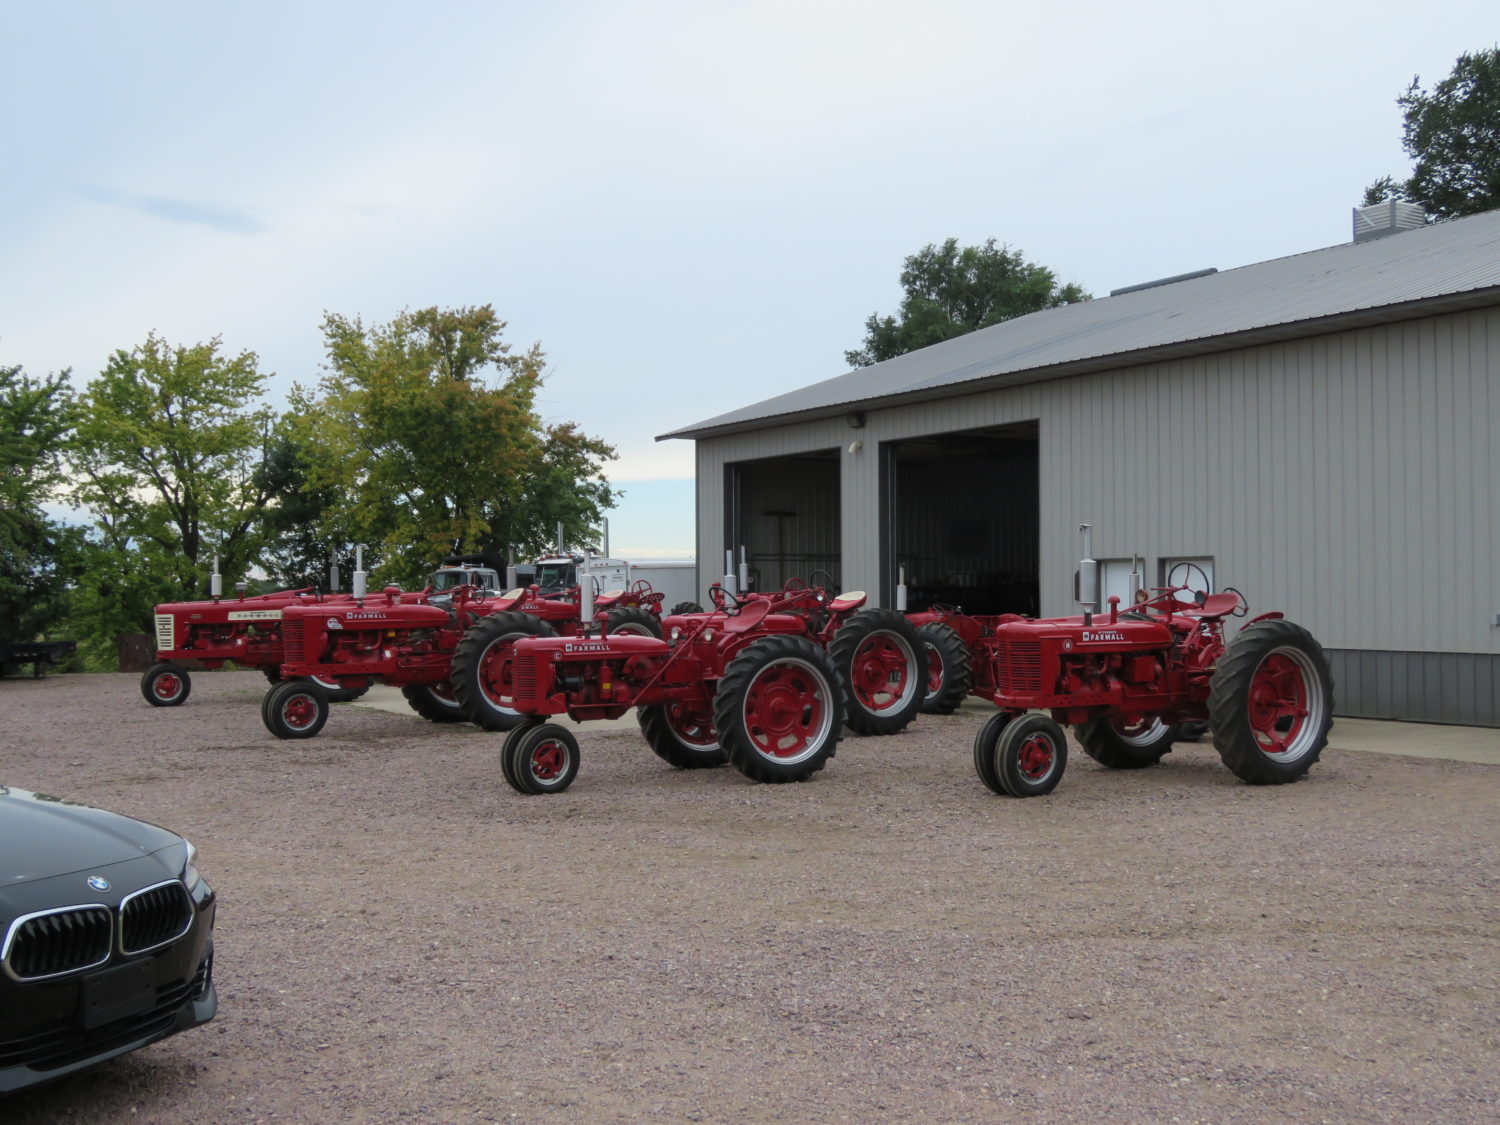 LIVE ONSITE W/ONLINE BIDDING! Location..Location..Location! 25acre Acreage with Home, Shop, & Pasture! Antique Tractors, Collector Cars, Construction, Tools & More! - image 12